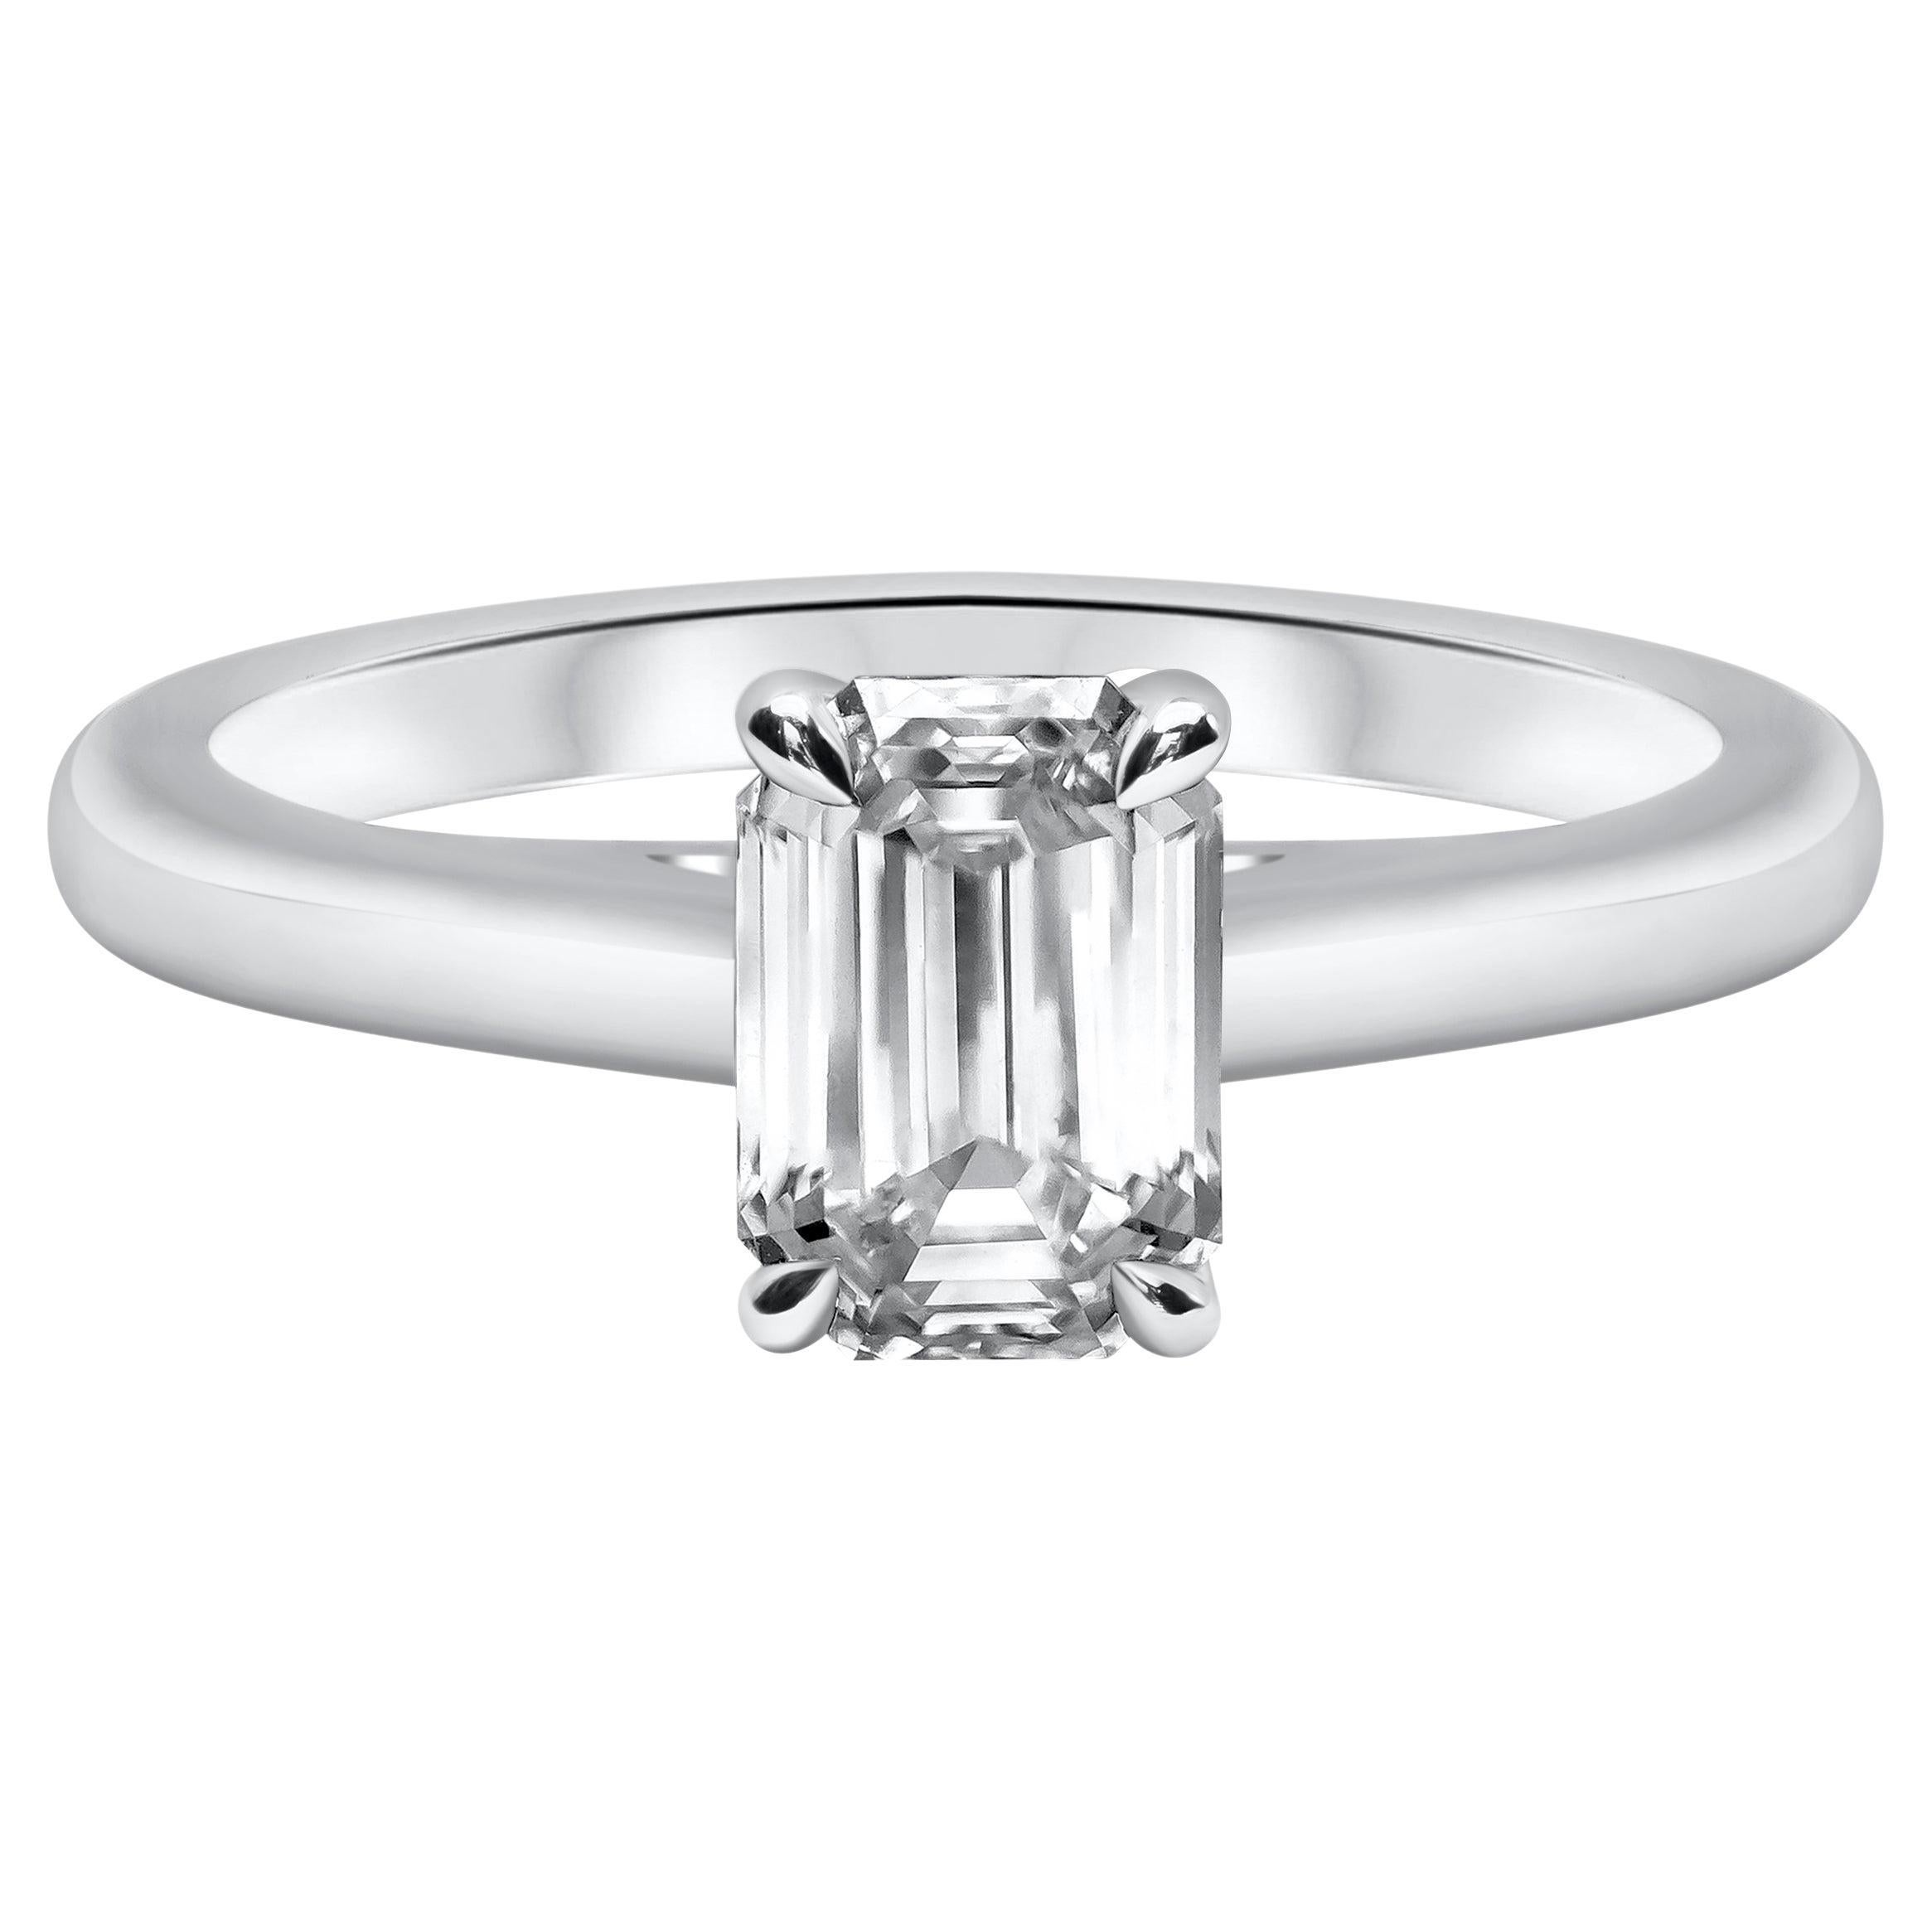 GIA Certified 1.21 Carats Total Emerald Cut Diamond Solitaire Engagement Ring For Sale